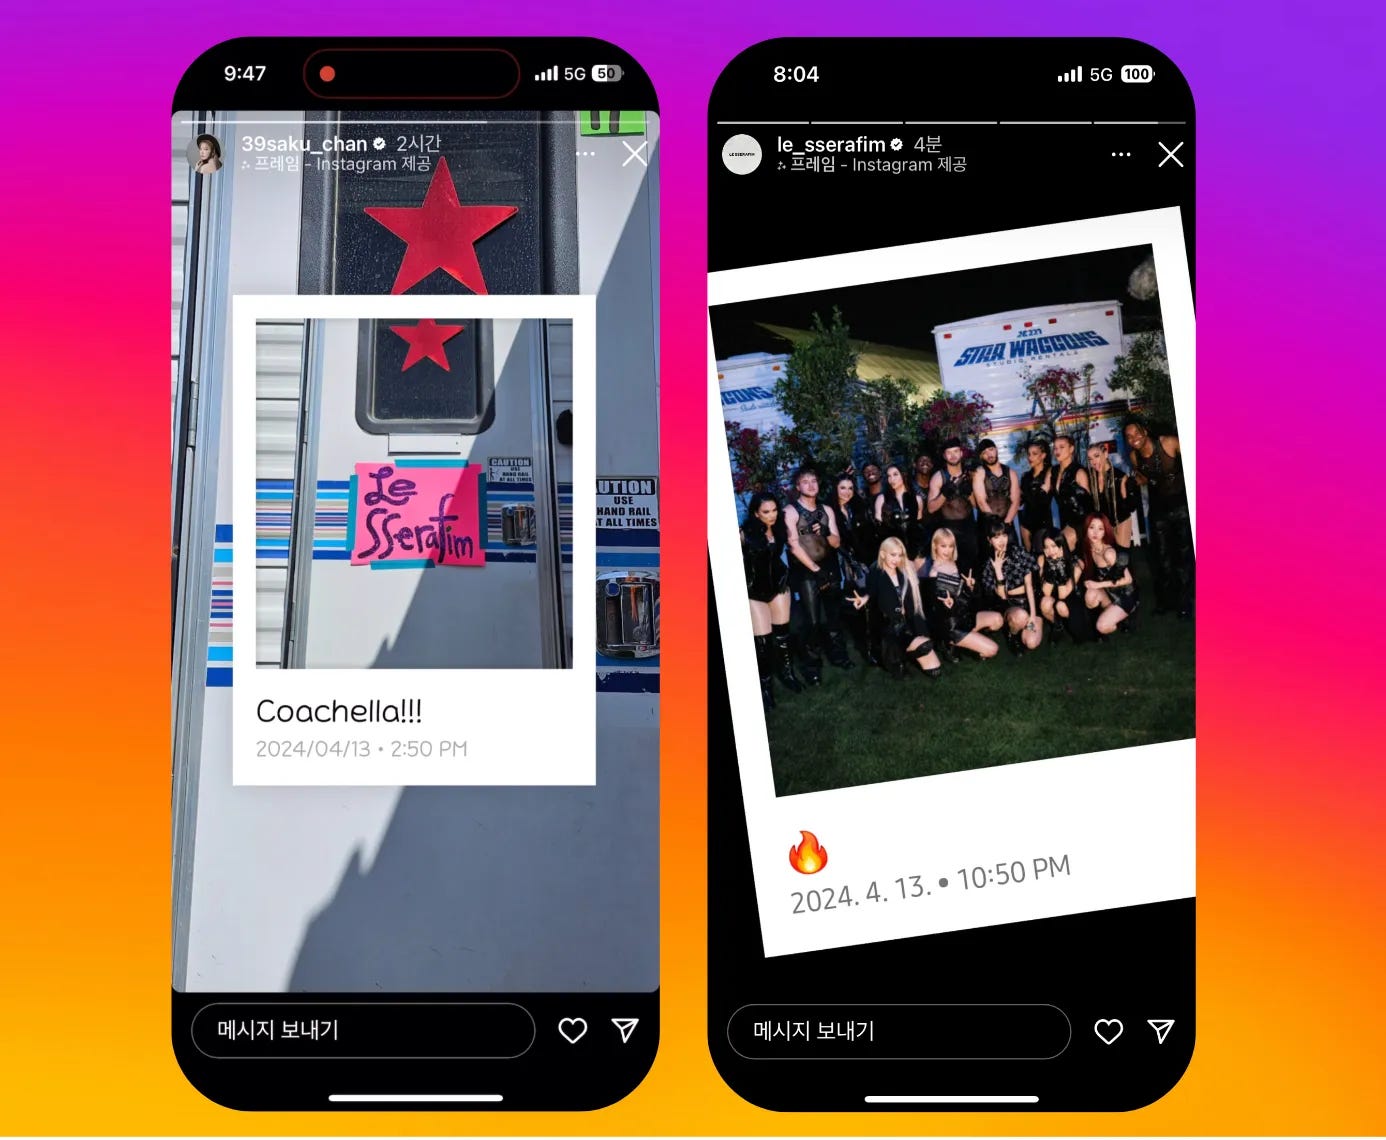 2 mobile phone screens showing a new Instagram feature called Frames that was first used by the K-Pop band LE SSERAFIM at Coachella. On the left is a trailer door that says LE SSERAFIM. On the right is the whole group gathered in front of a trailer that says Star Wagons. The date on these is April 13, 2024.